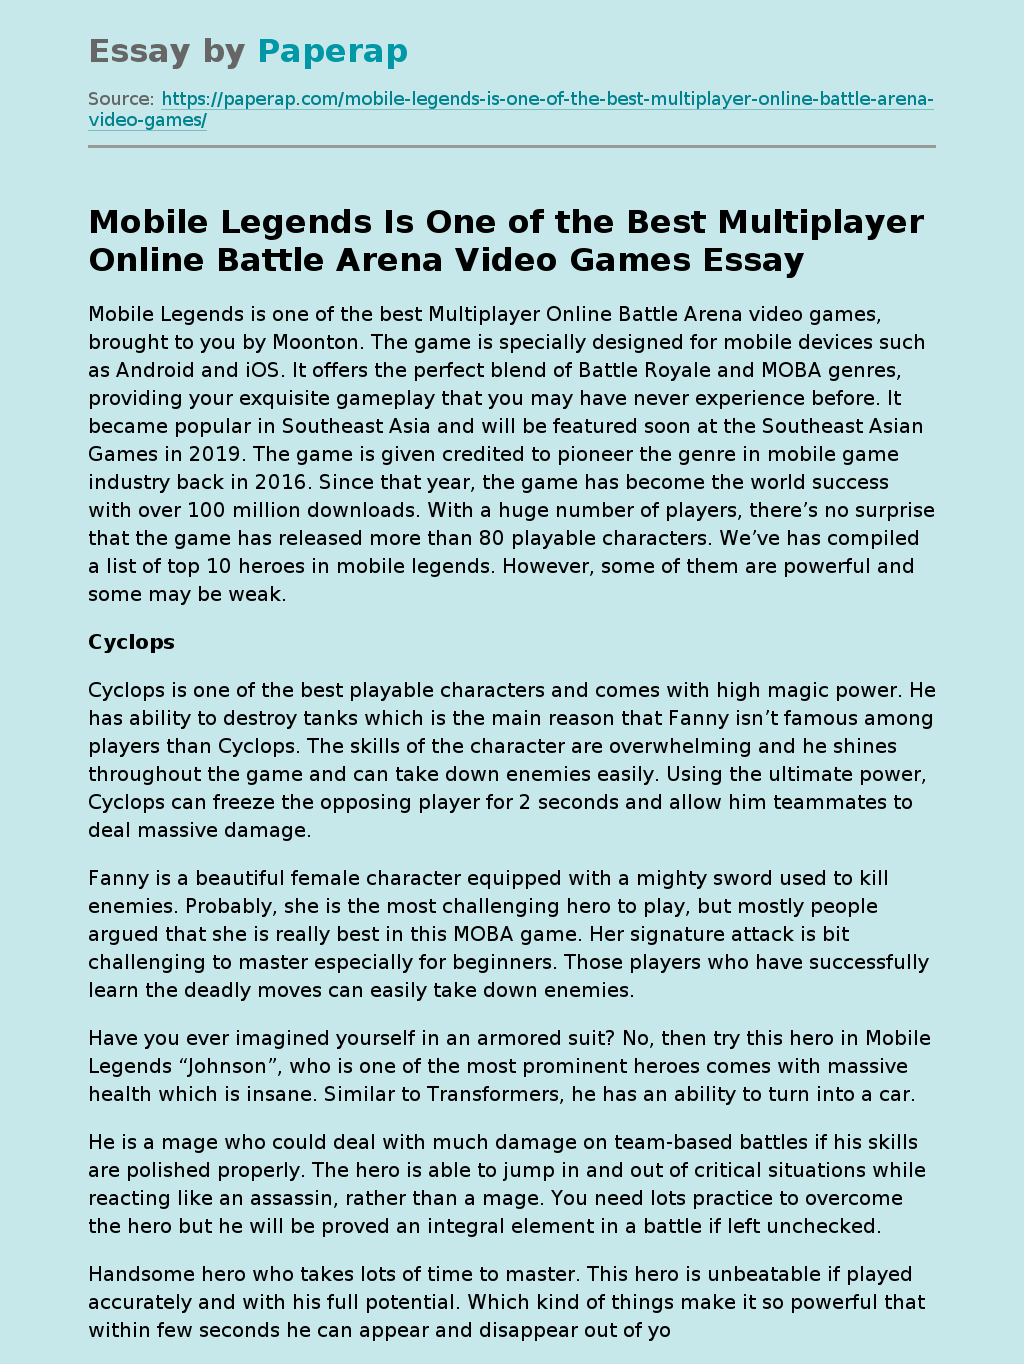 Mobile Legends Is One of the Best Multiplayer Online Battle Arena Video Games